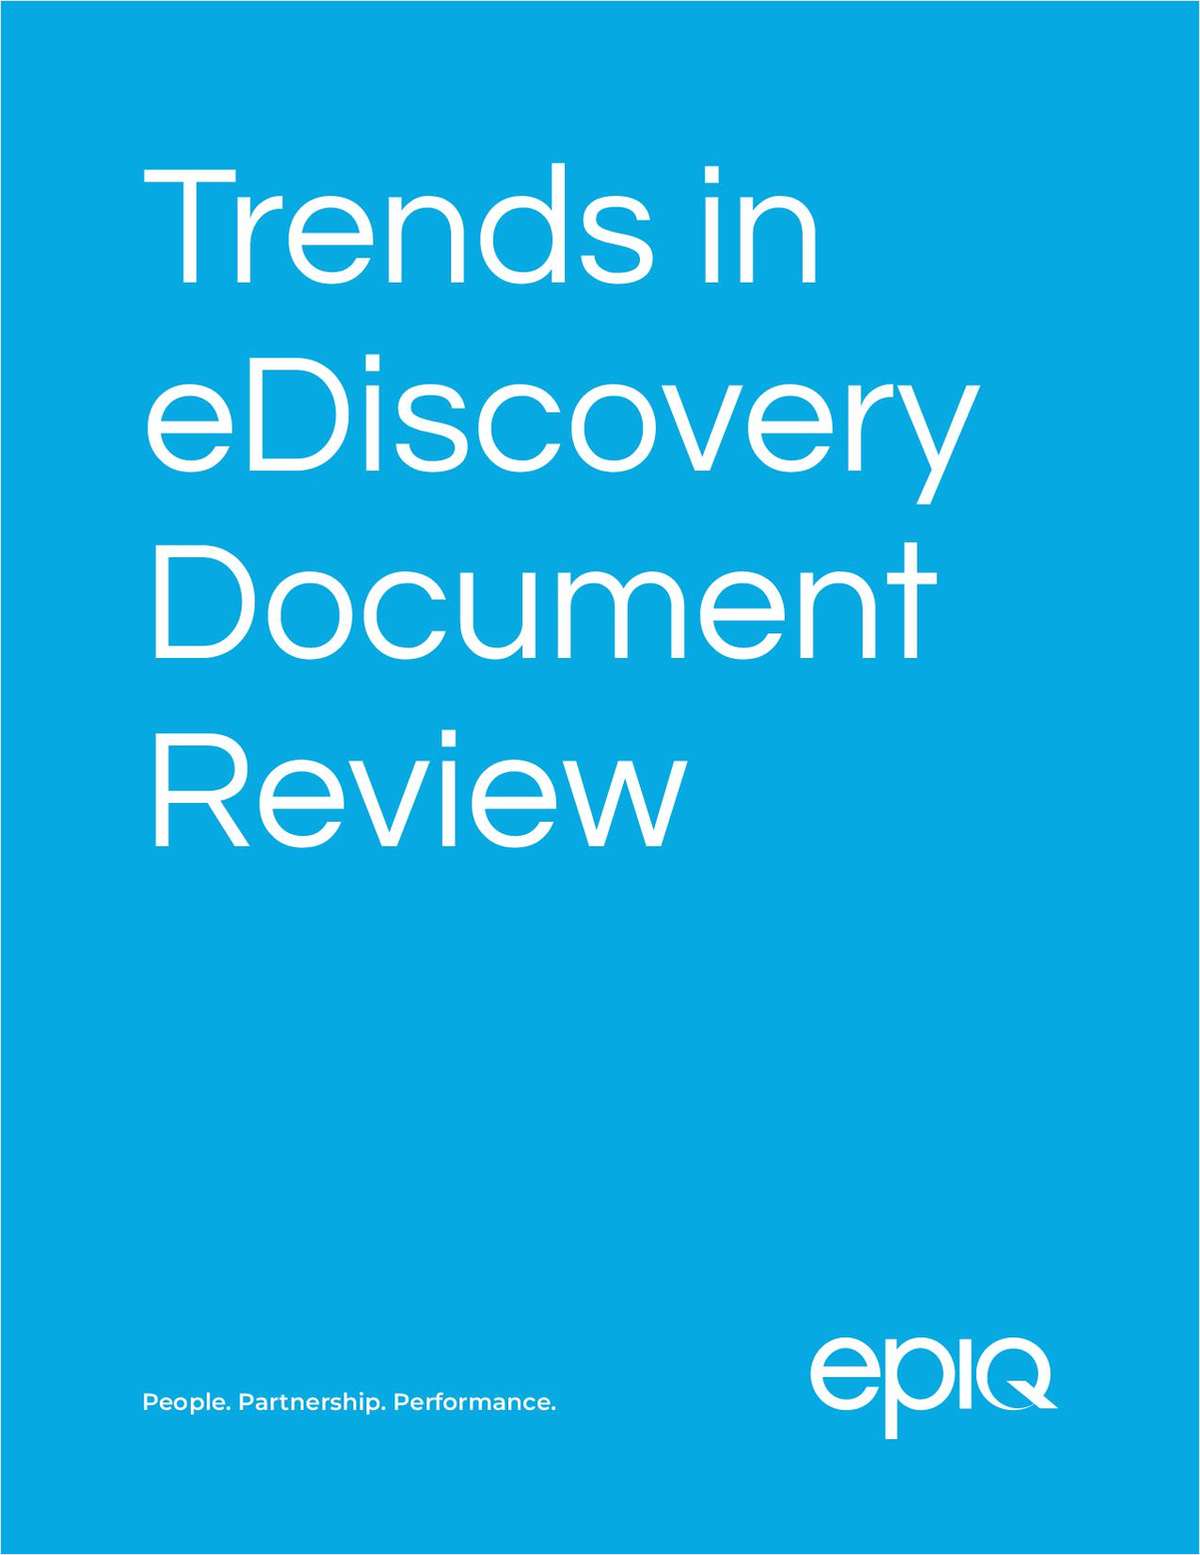 Trends in eDiscovery Document Review